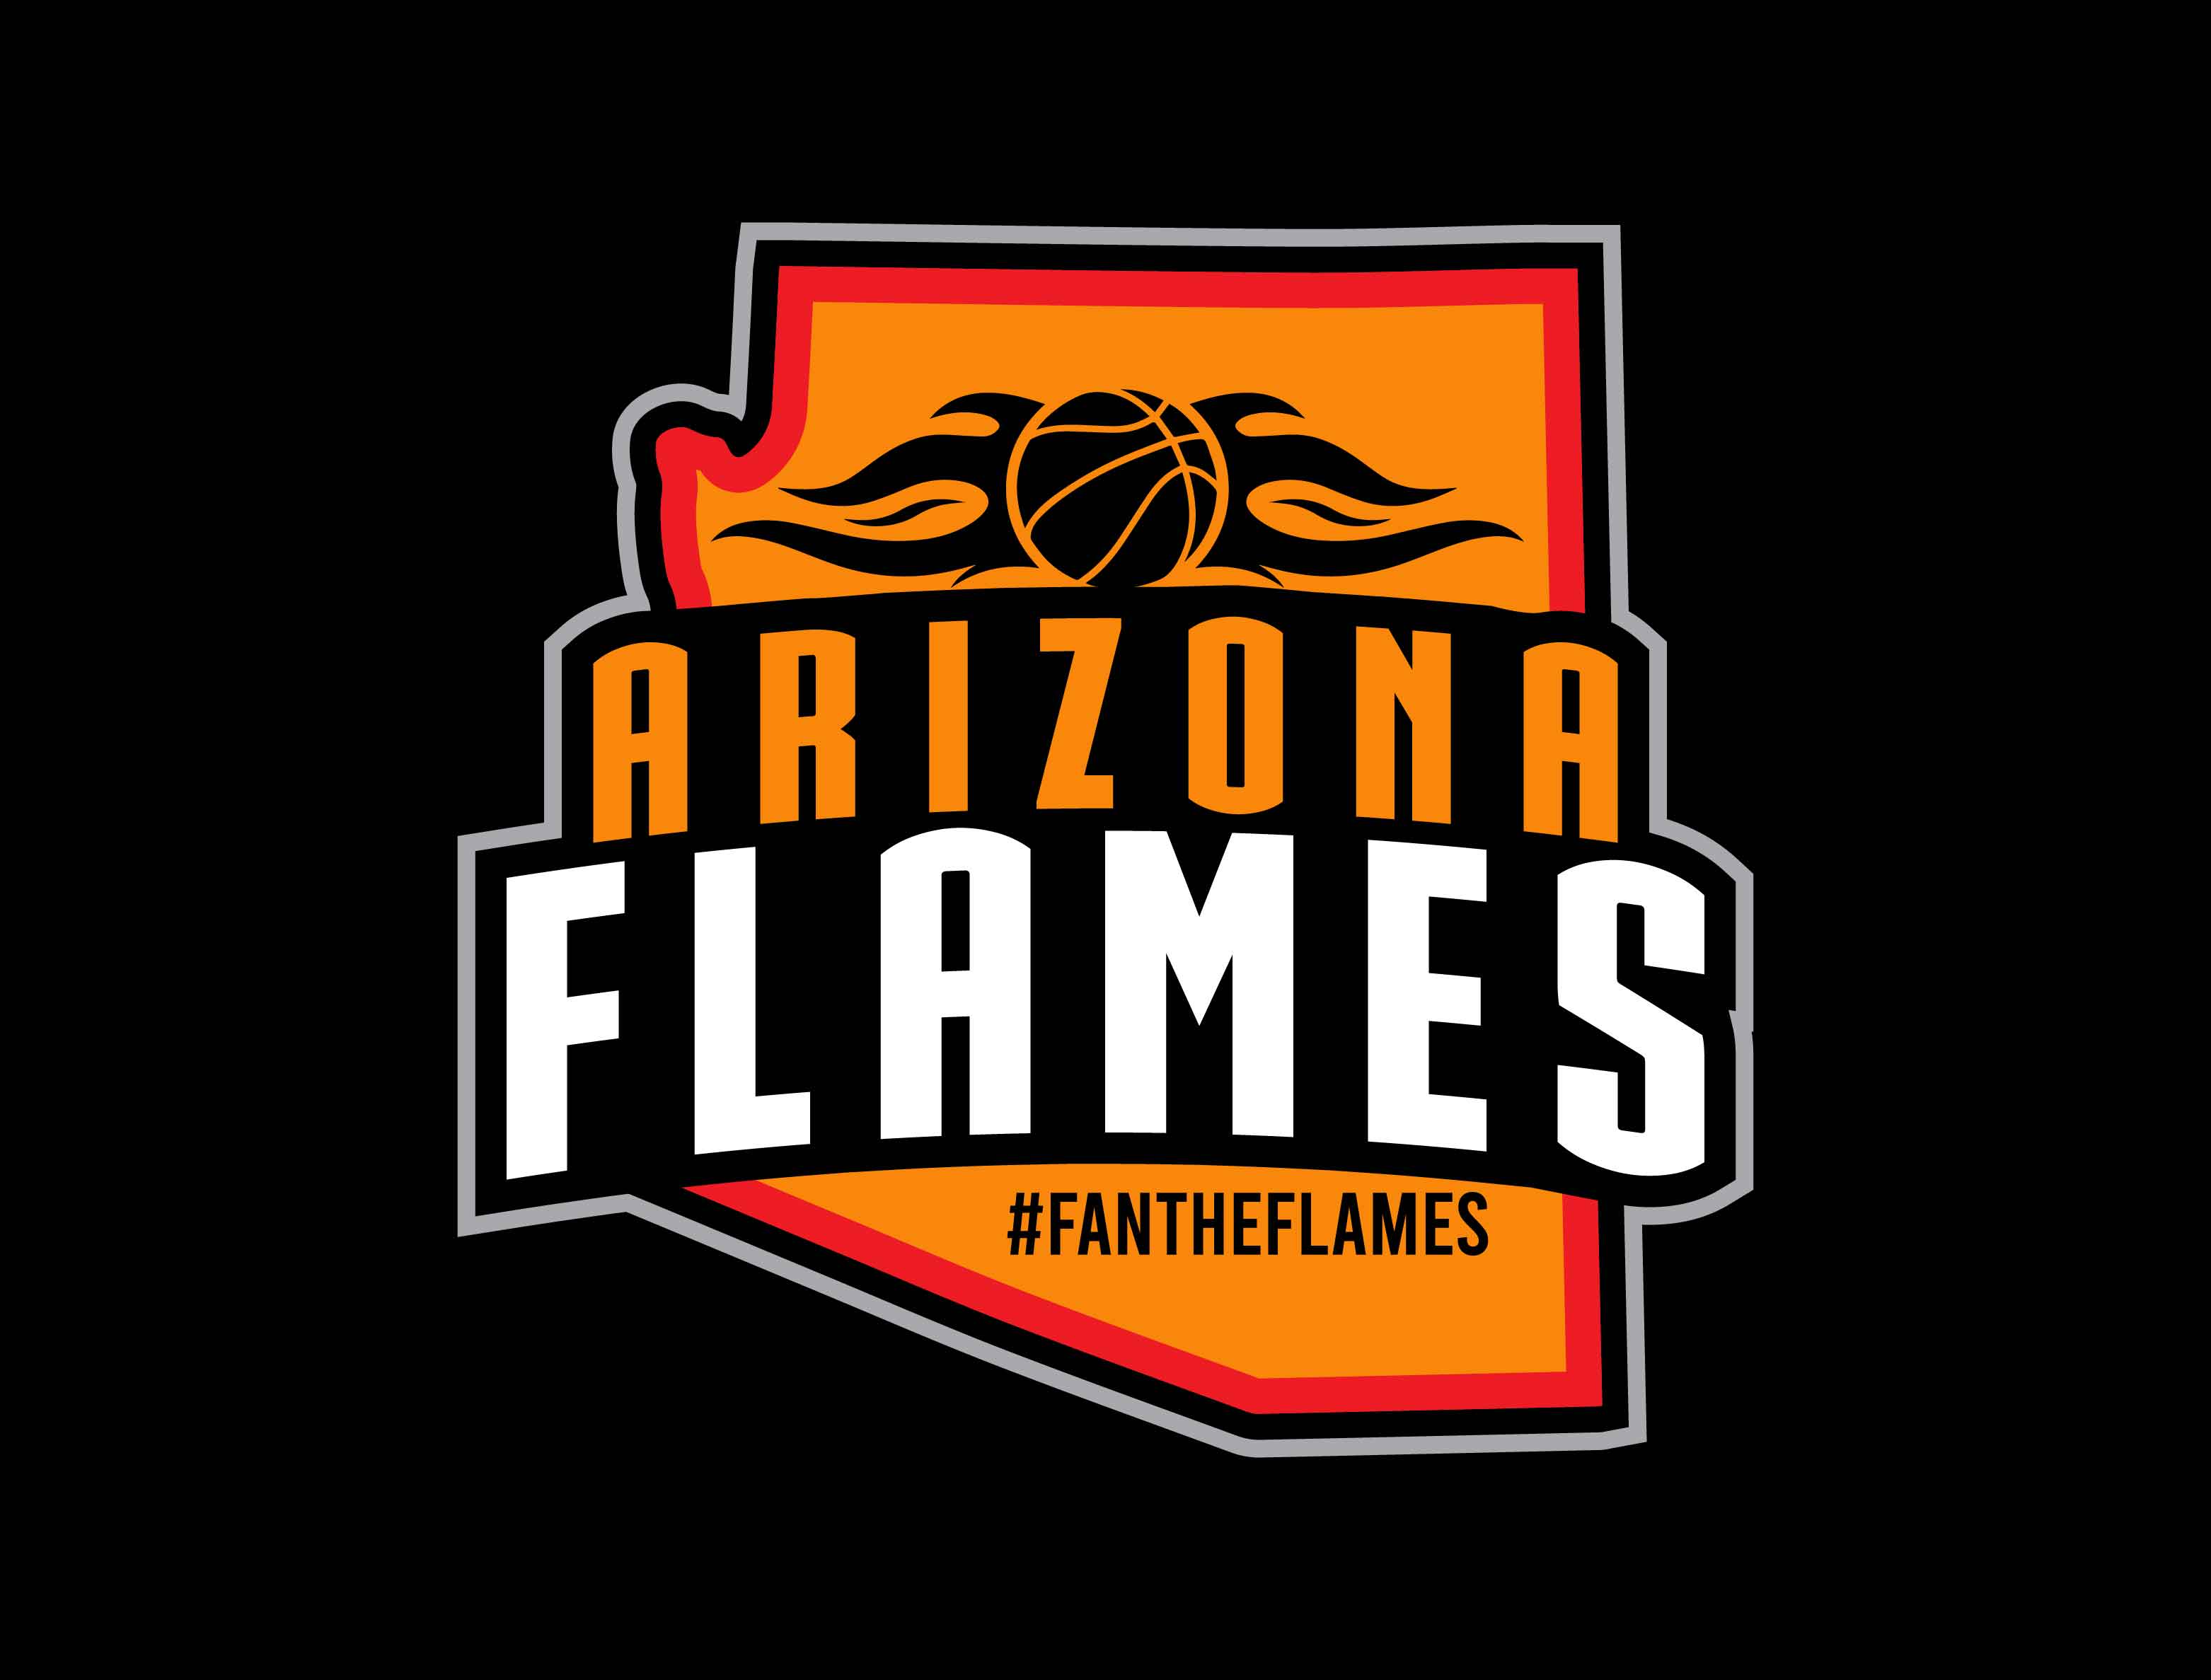 ARIZONA FLAMES ADDED TO GROWING NUMBER OF ABA TEAMS